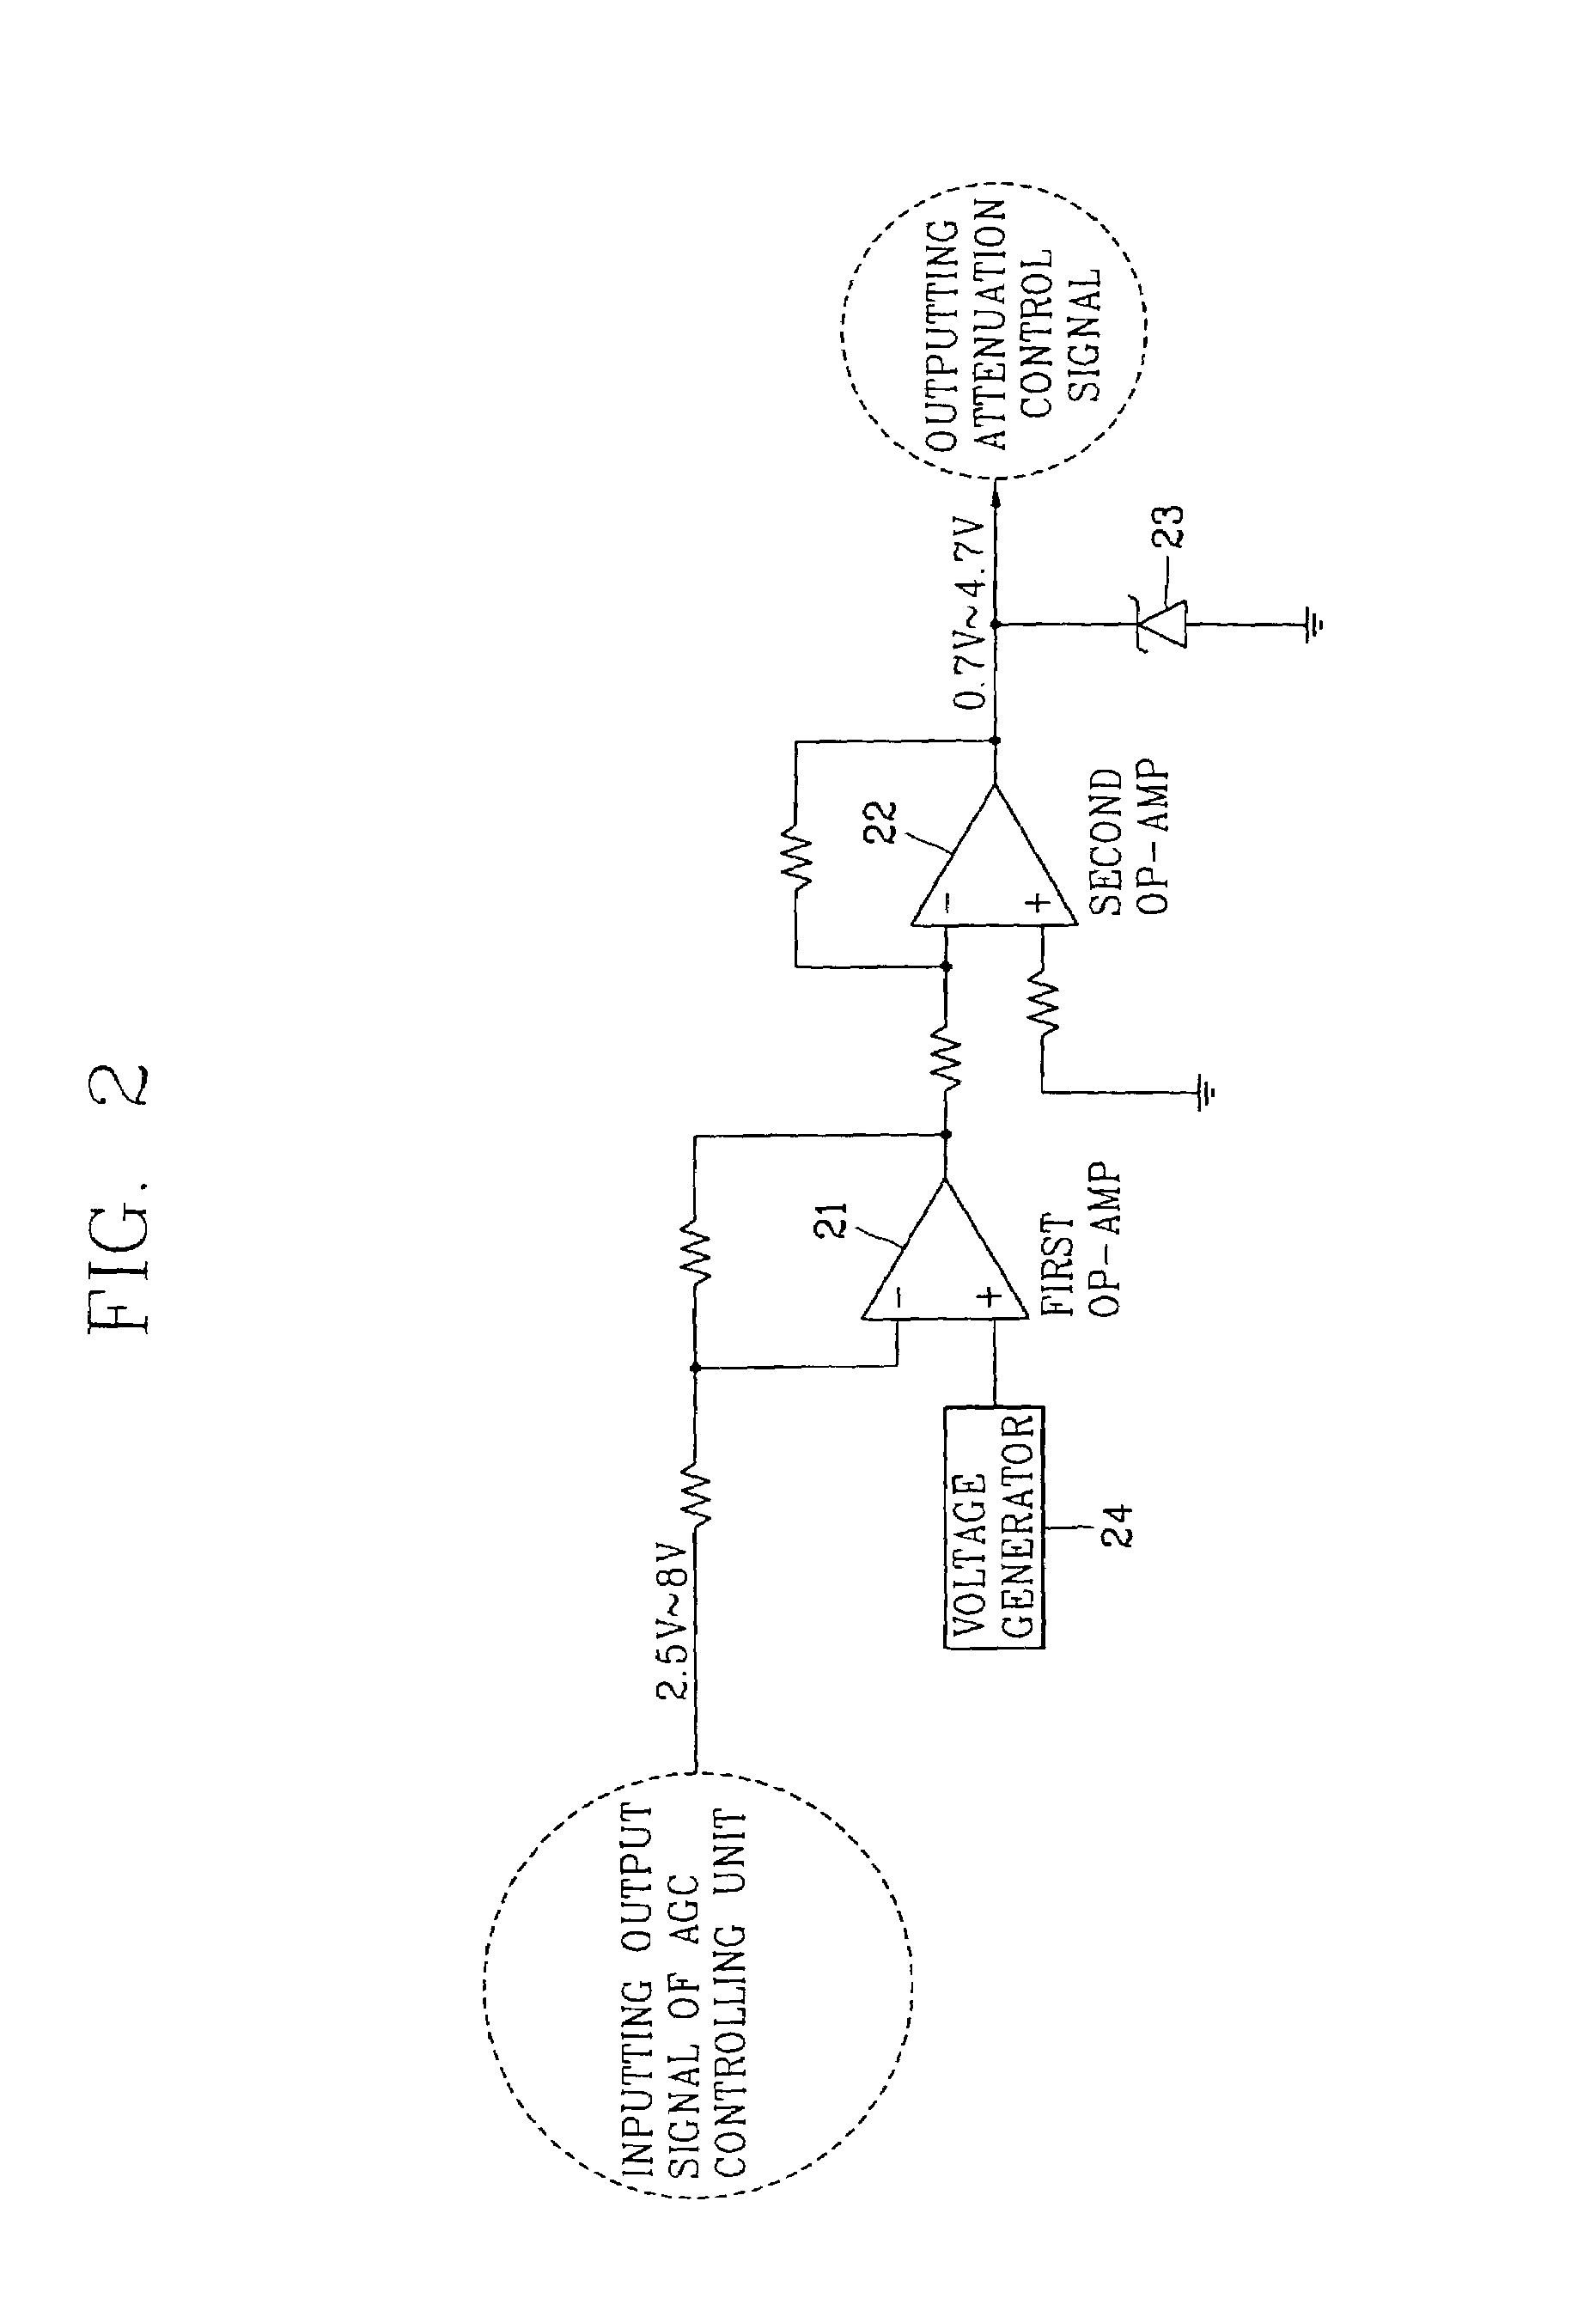 Radio frequency signal attenuation circuitry and gain controlling unit